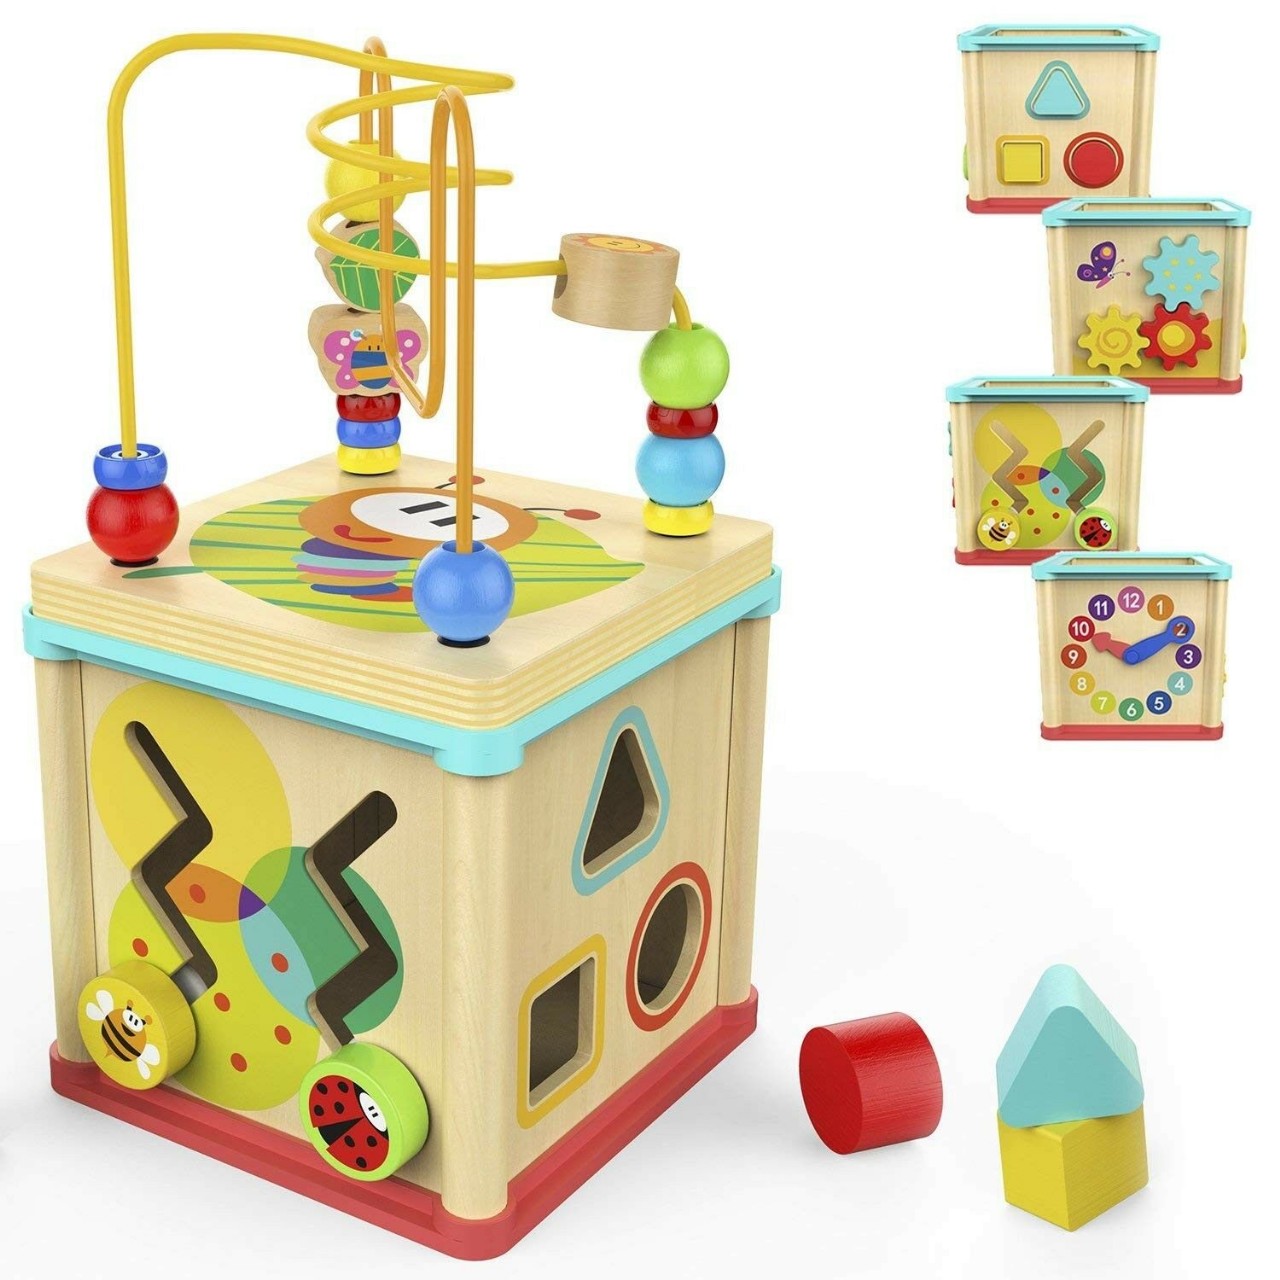 Toysery Educational Baby Toddler Kids Toy Musical Activity Cube Play Center Gift